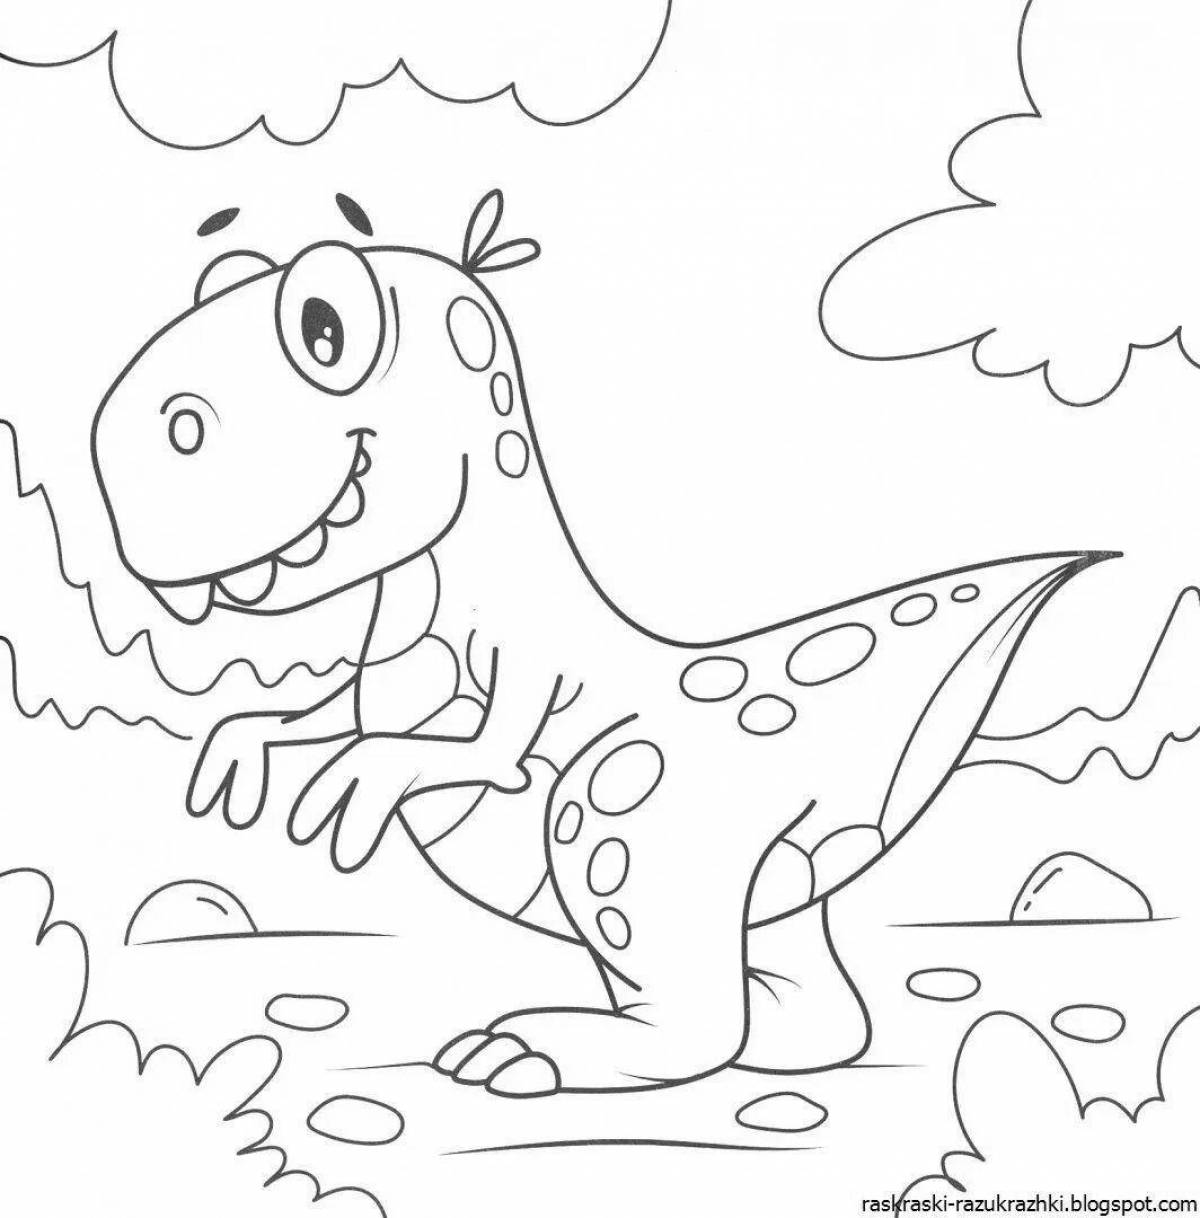 Funny dinosaurs coloring for boys 6-7 years old